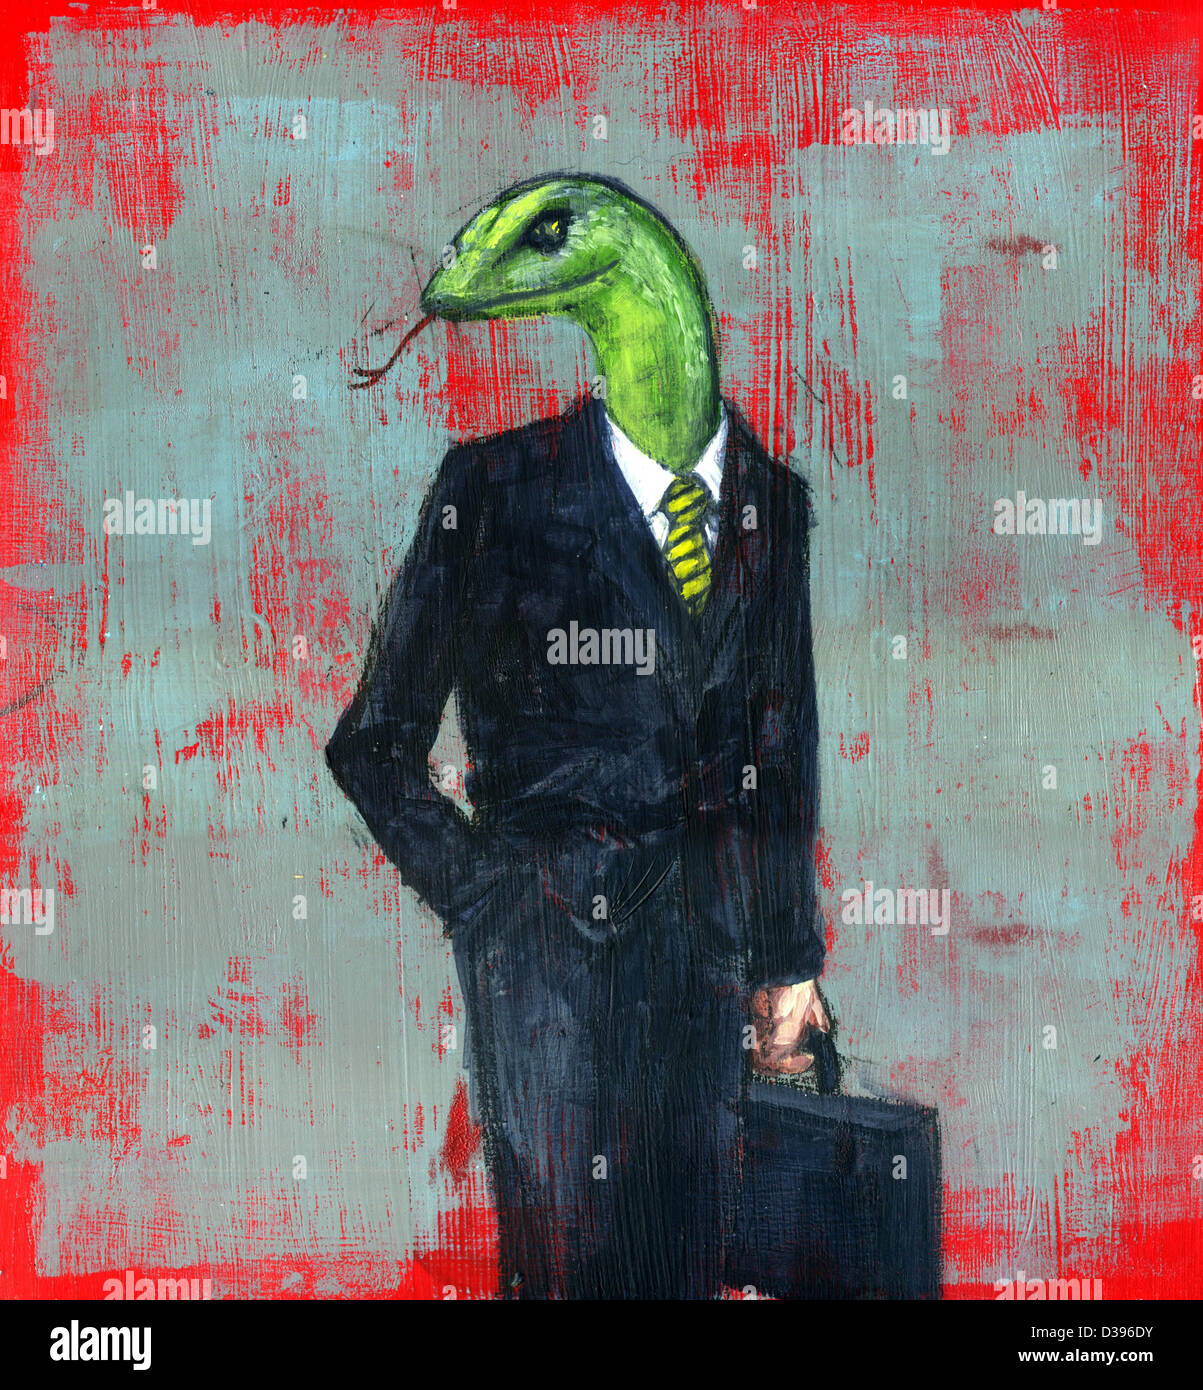 Conceptual illustration of businessman with snake head depicting dishonesty Stock Photo